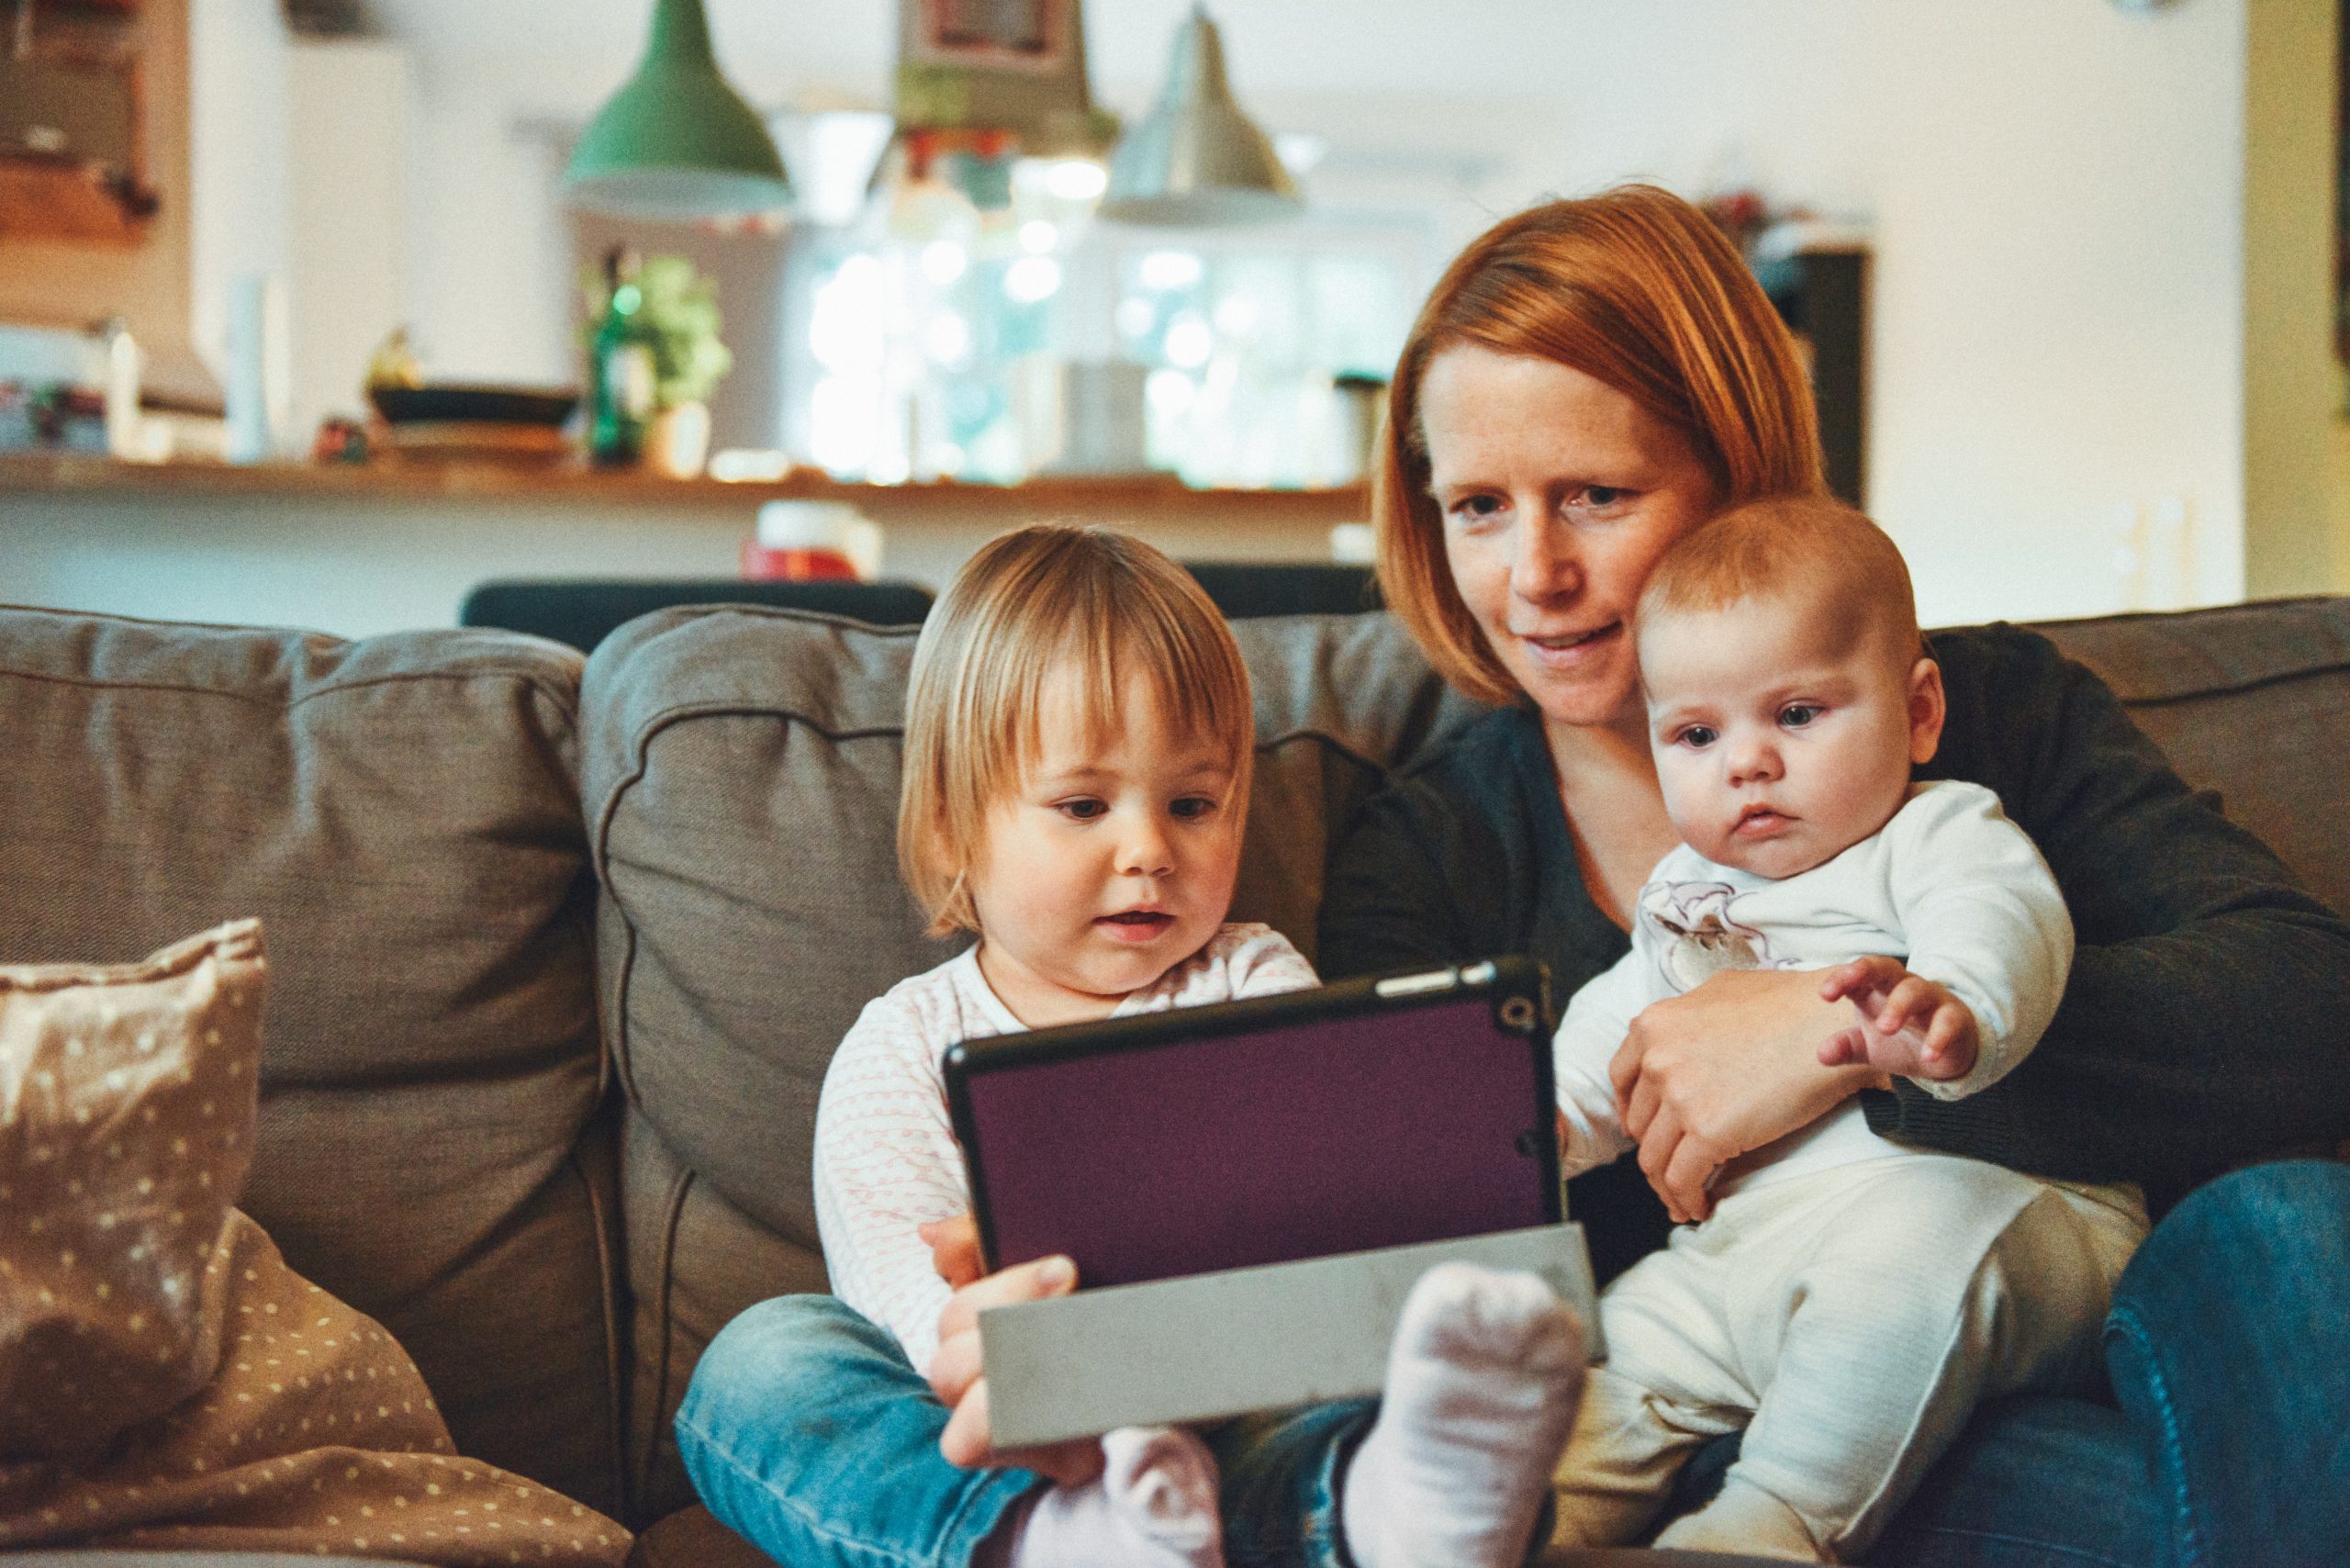 A woman holds a baby on a couch while a toddler sitting next to her holds a tablet. All of them are looking at the tablet, perhaps for a video chat.